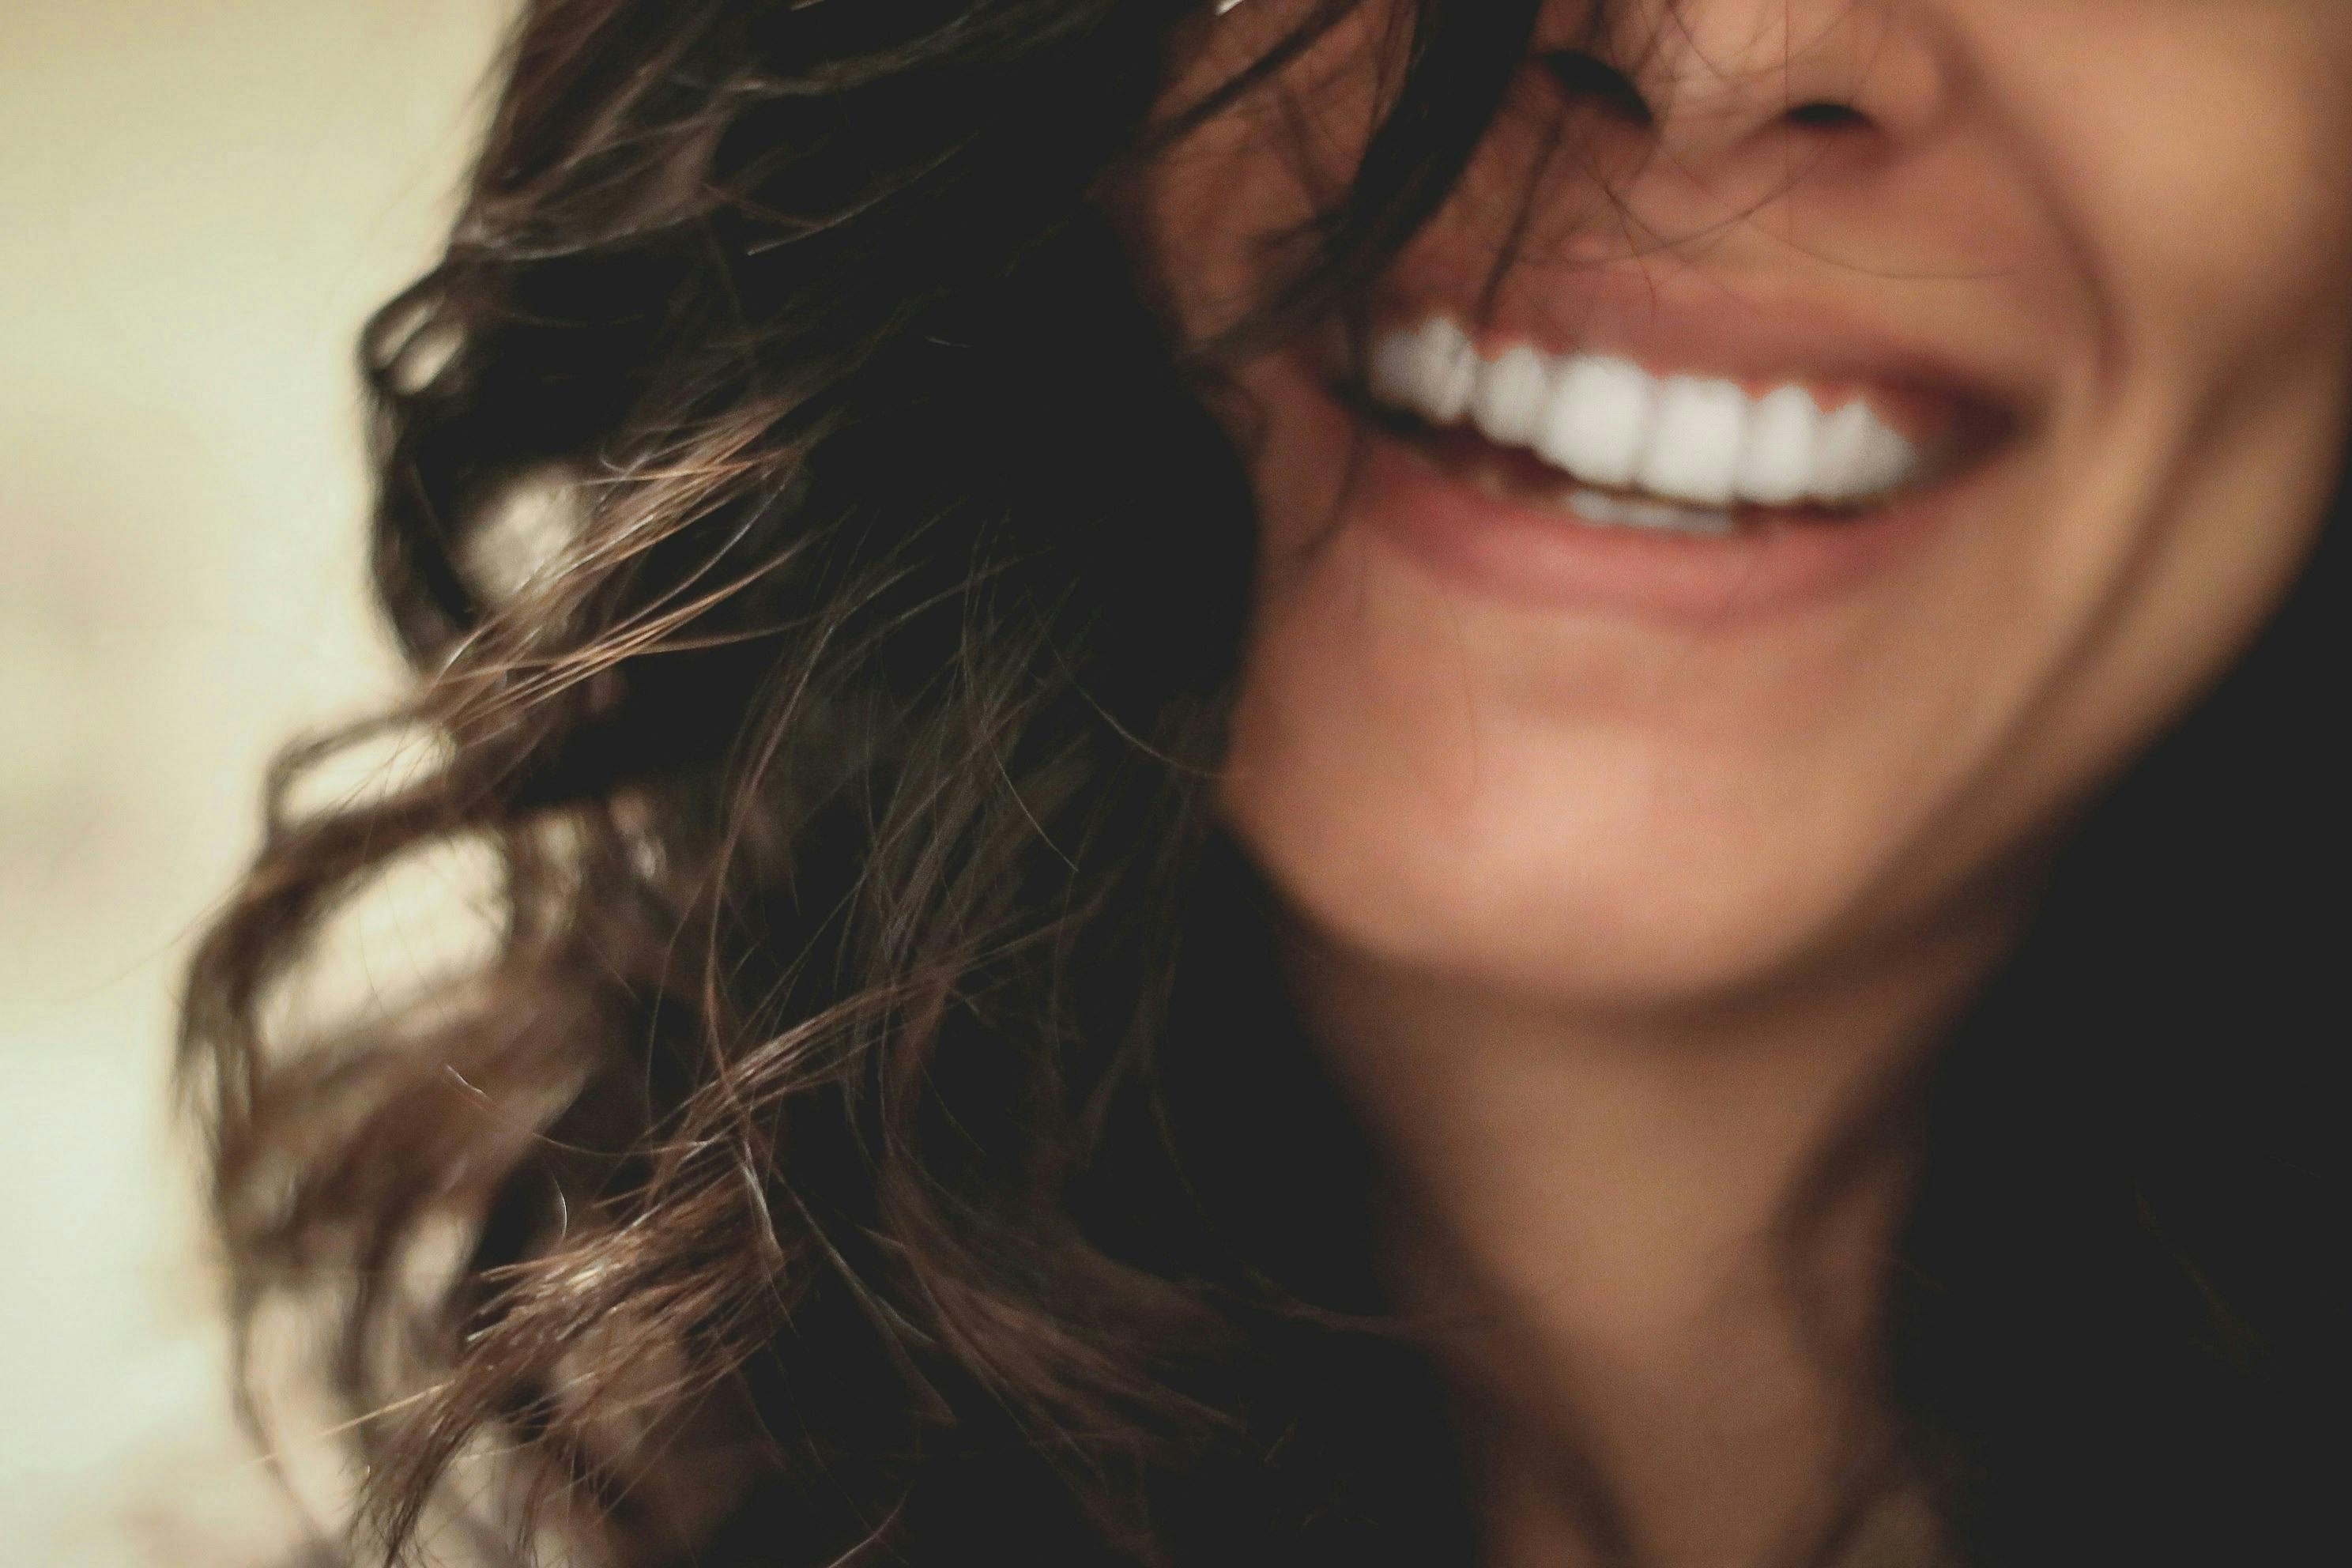 A woman with curly hair smiling broadly, showcasing her perfect white teeth after dental treatment